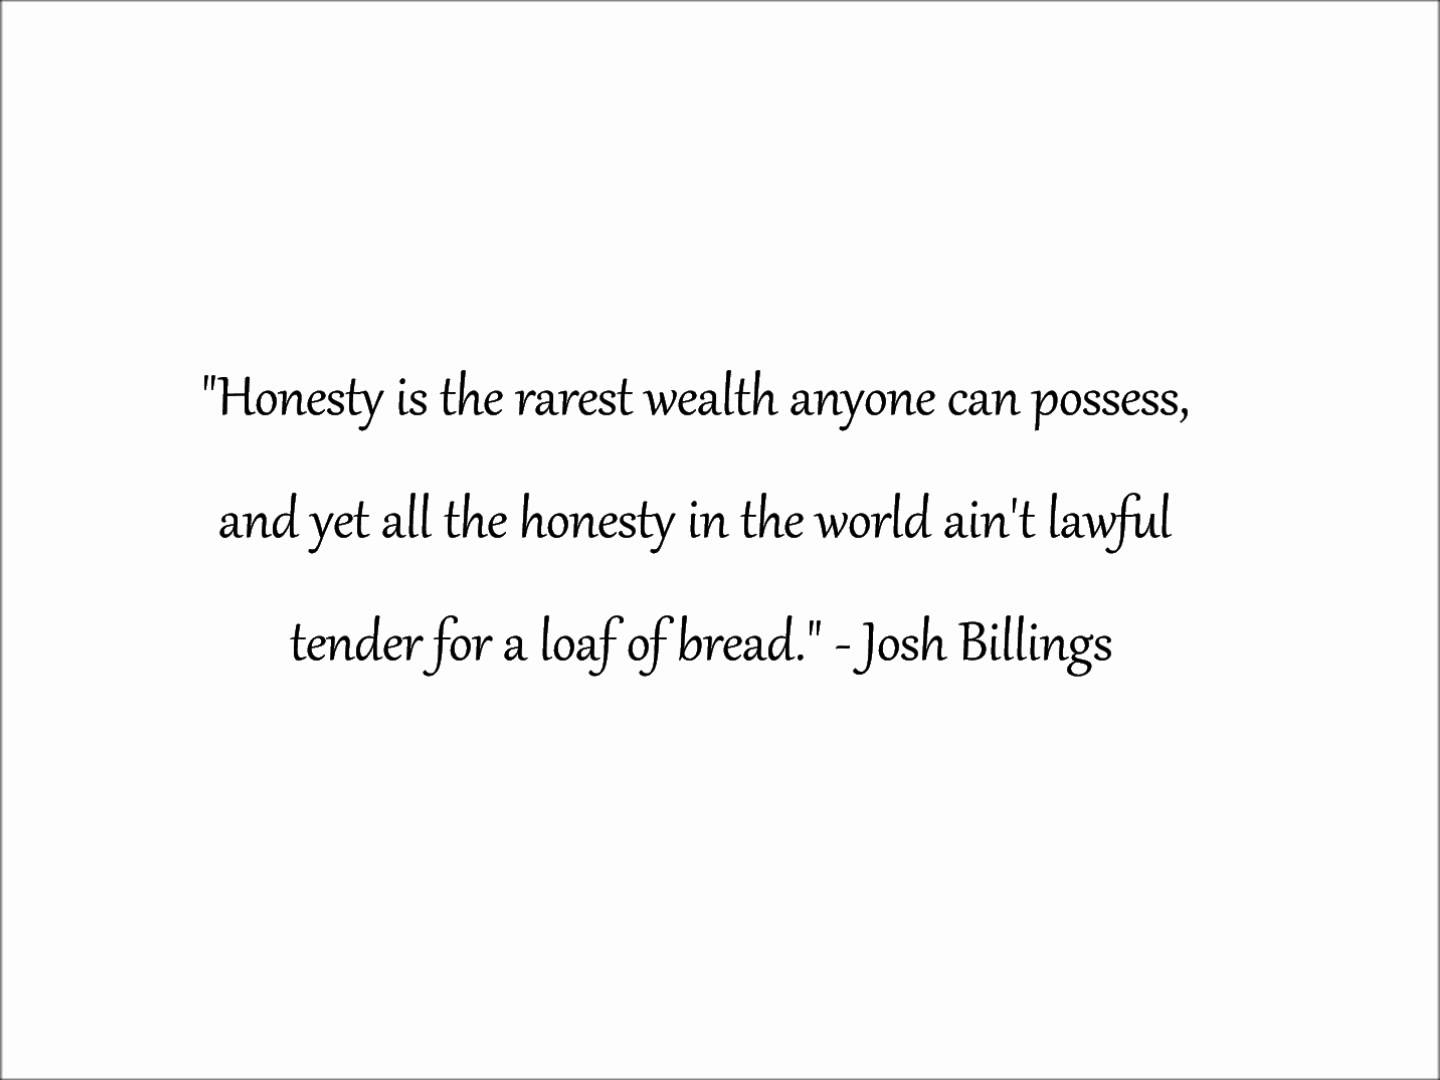 Honesty is the rarest wealth anyone can possess, and yet all the honesty in the world ain't lawful tender for a loaf of bread. - Josh Billings